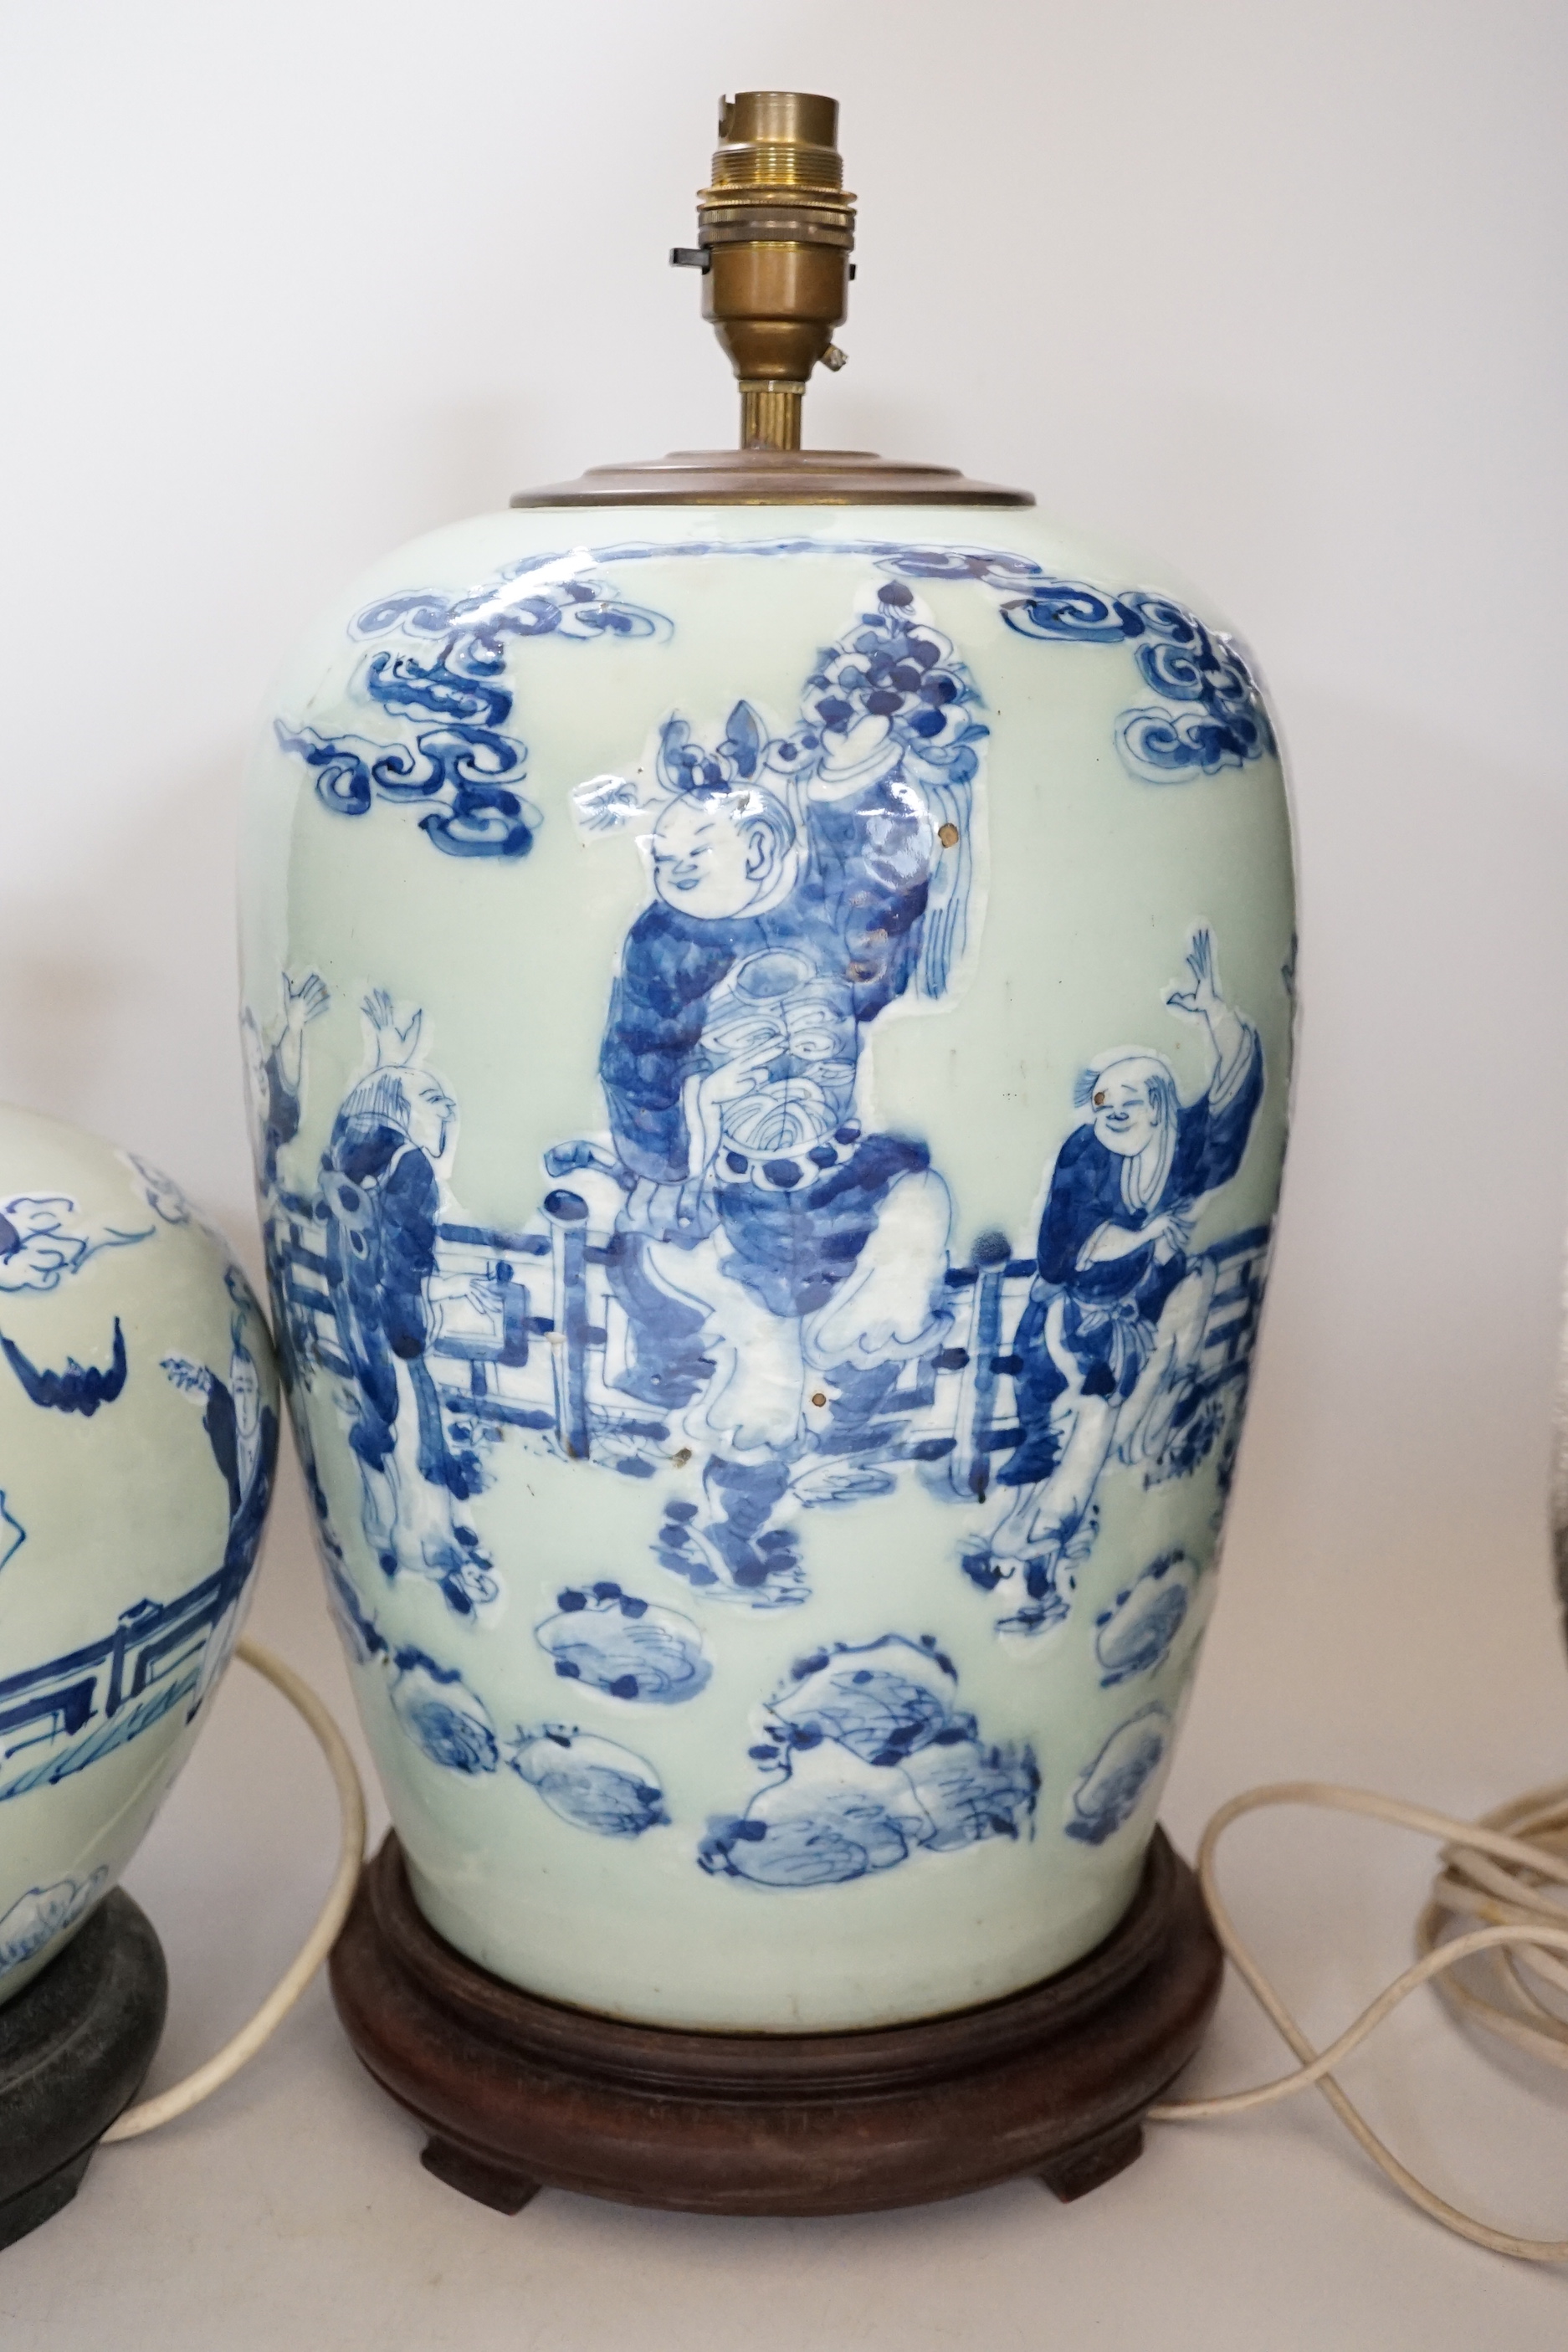 Two Chinese blue and white celadon glazed lamp bases, largest 43cm high including fitting